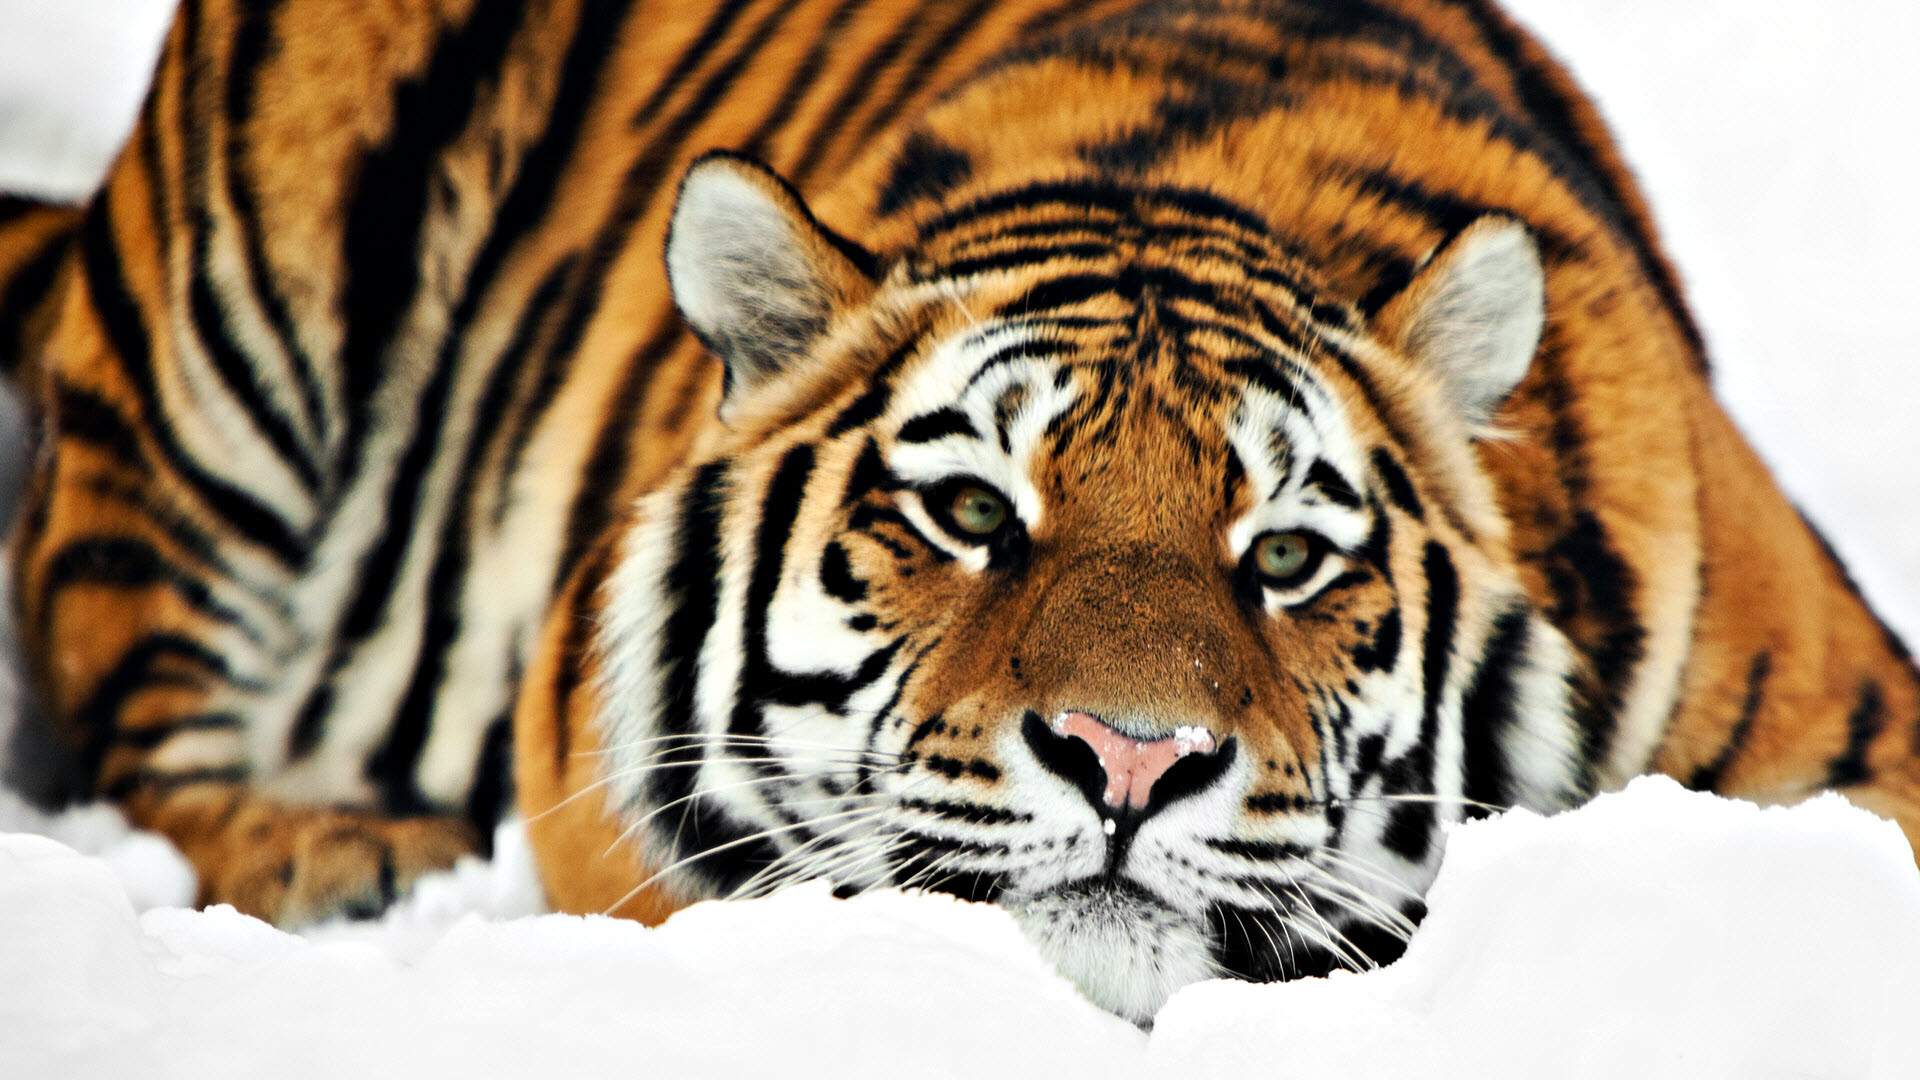 Tiger: Amur tigers have orange fur with thin black stripes and a white underbelly. 1920x1080 Full HD Background.